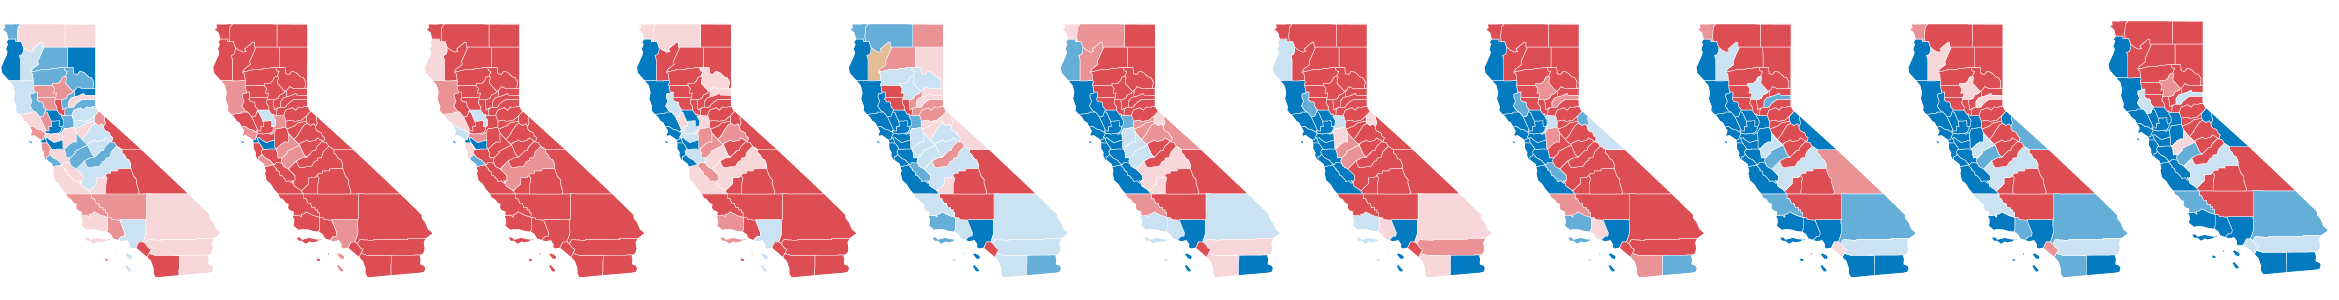 When did California become a state?